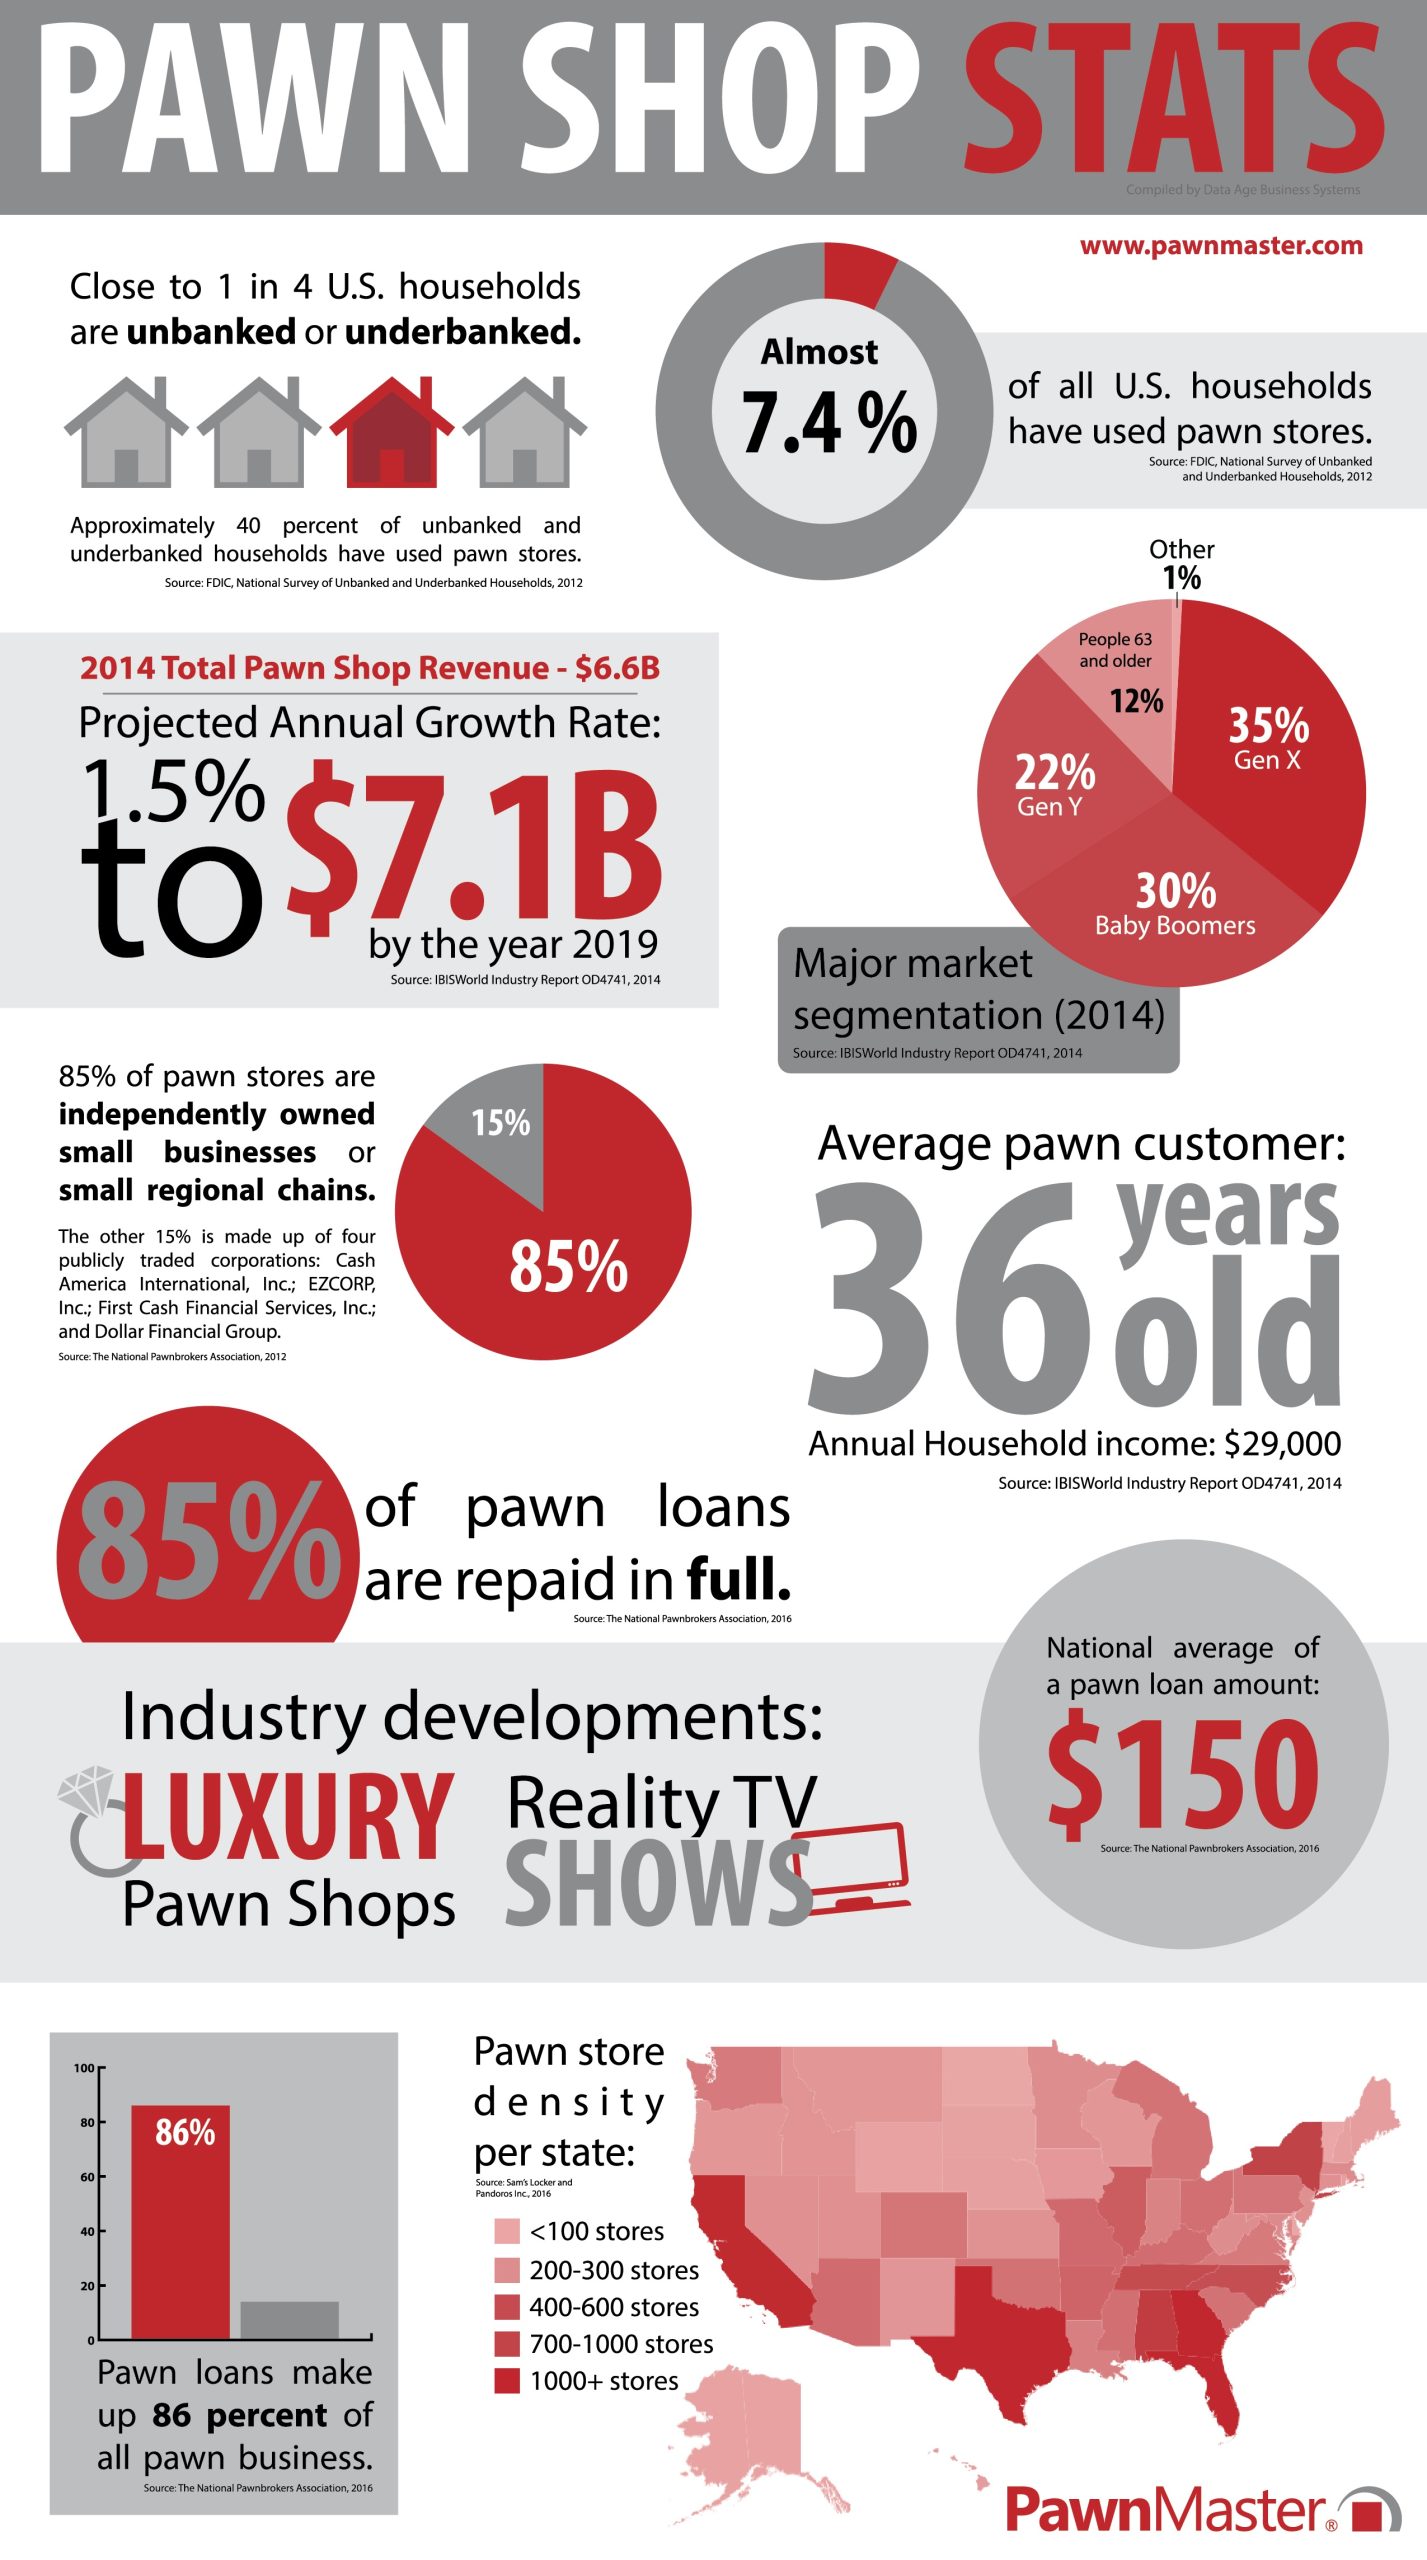 Pawn_Shop_Stats_infographic-01.jpg